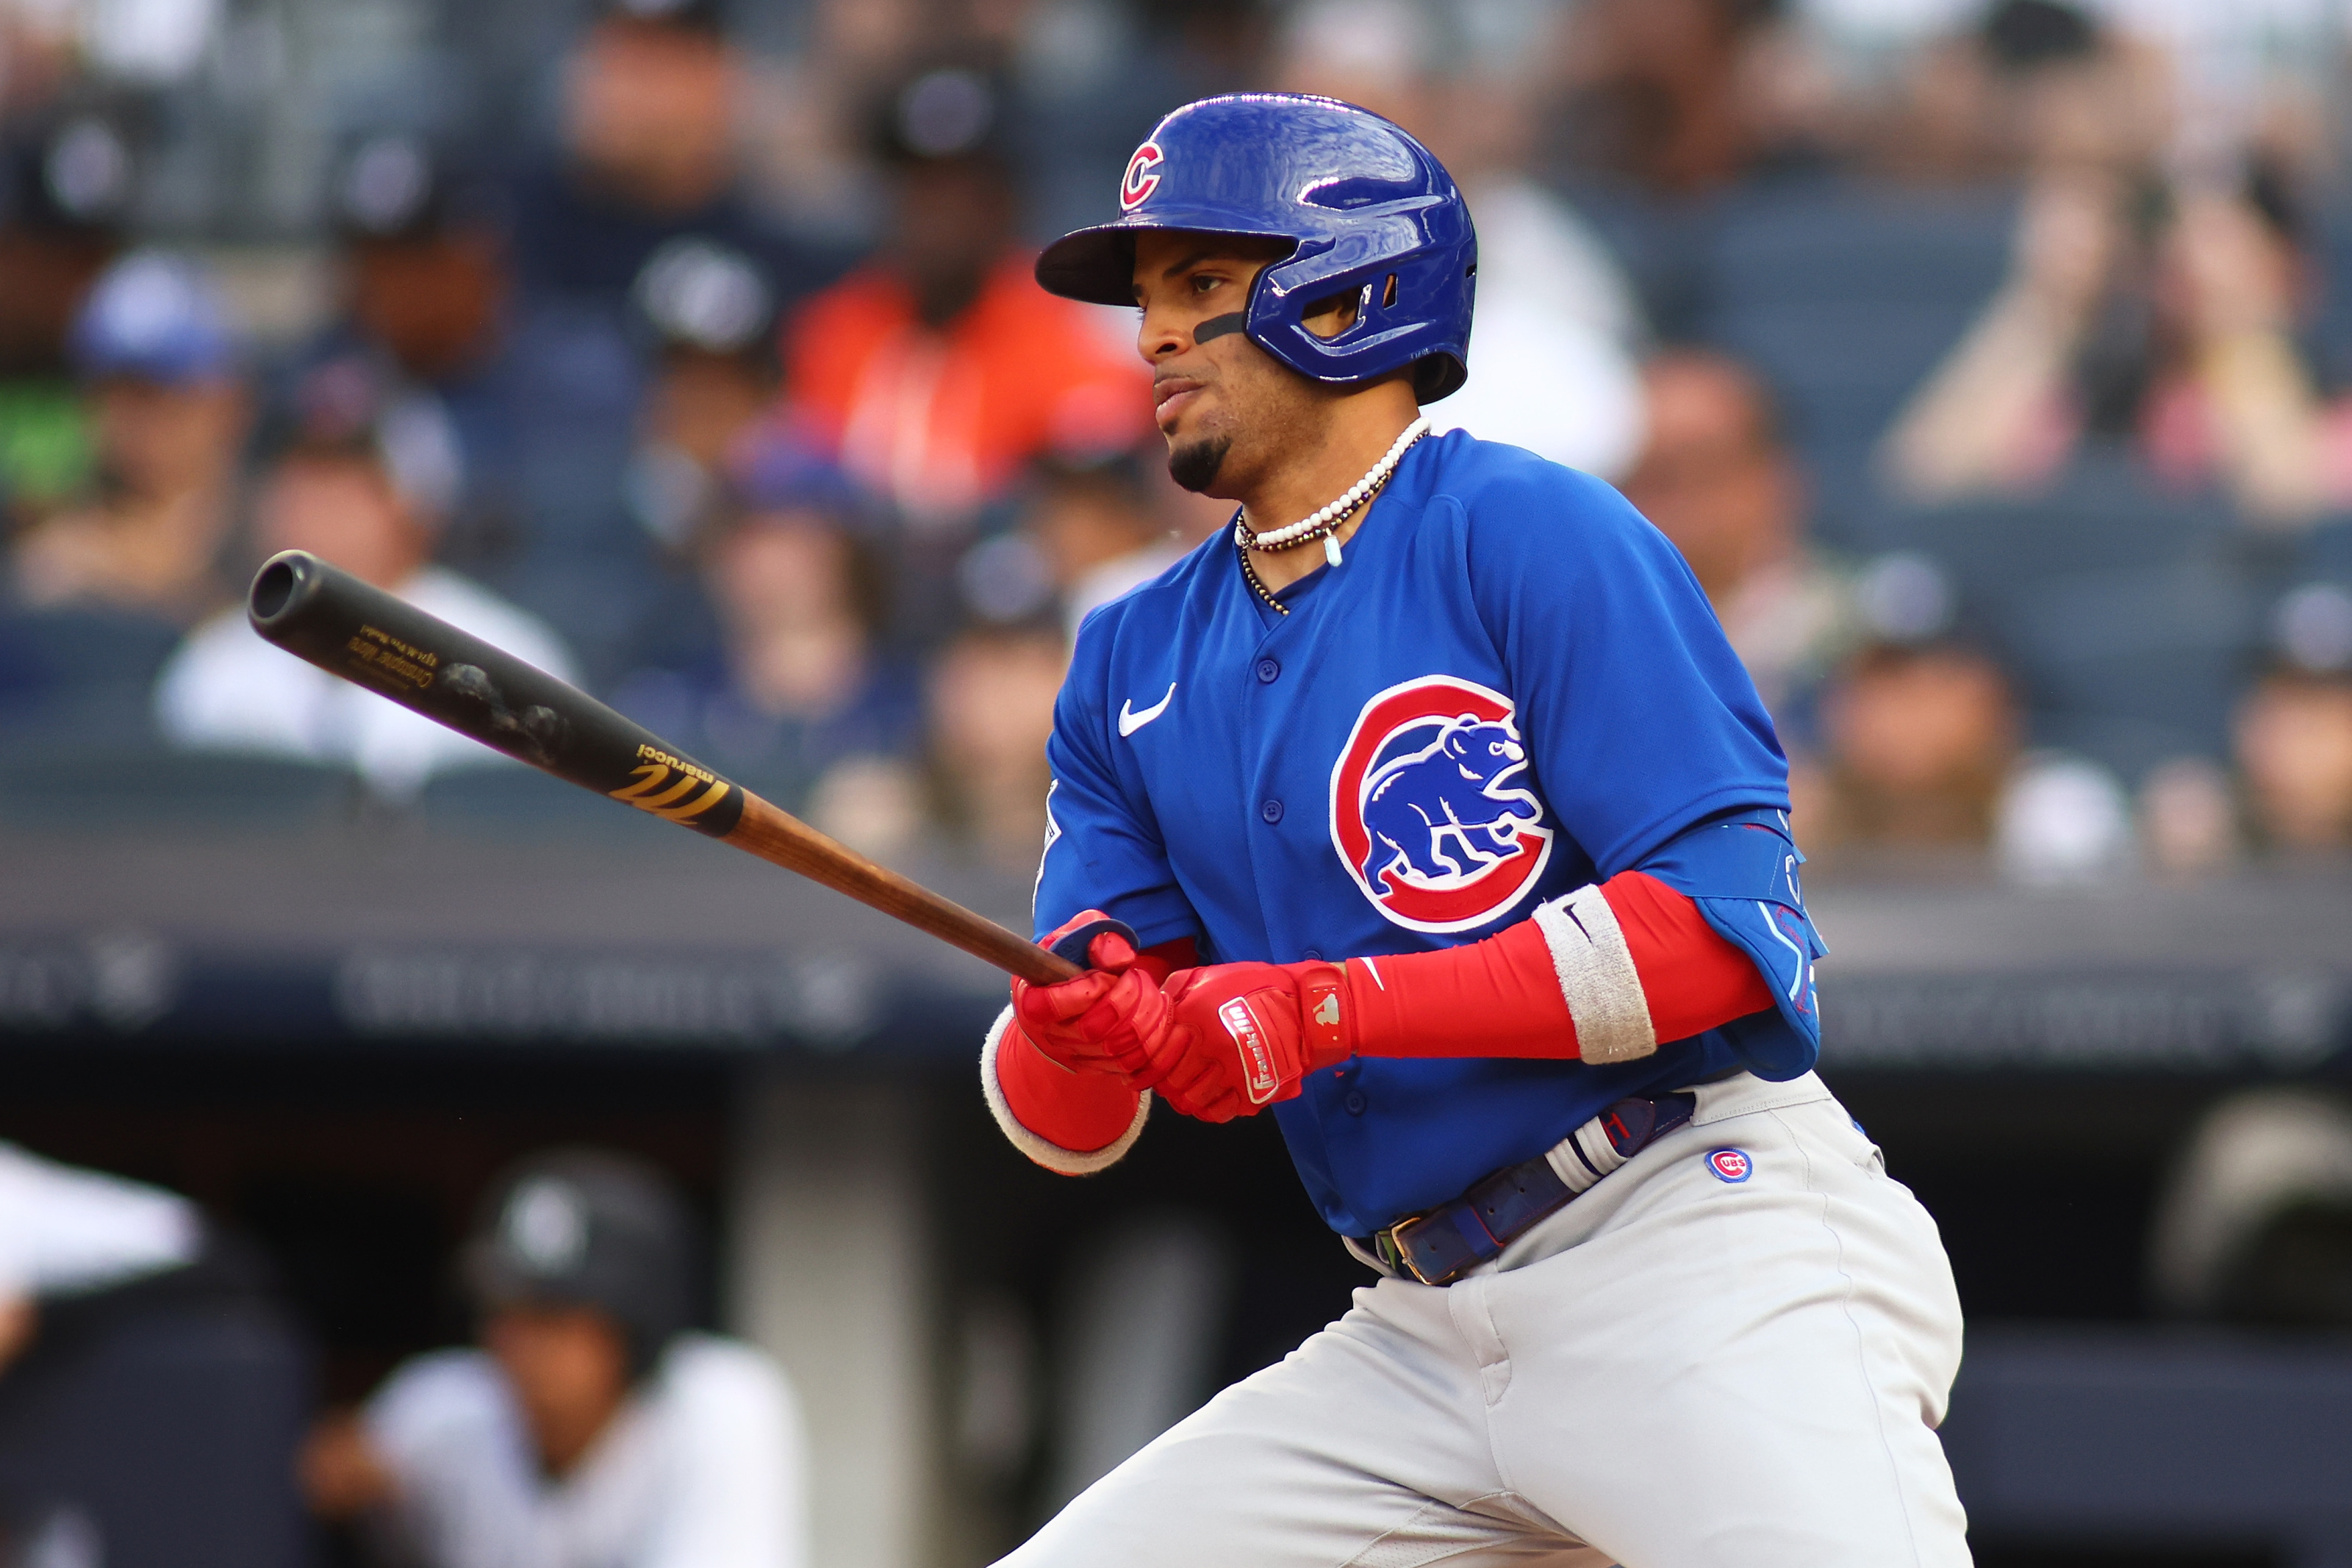 Chicago Cubs make history with first Yankee Stadium win